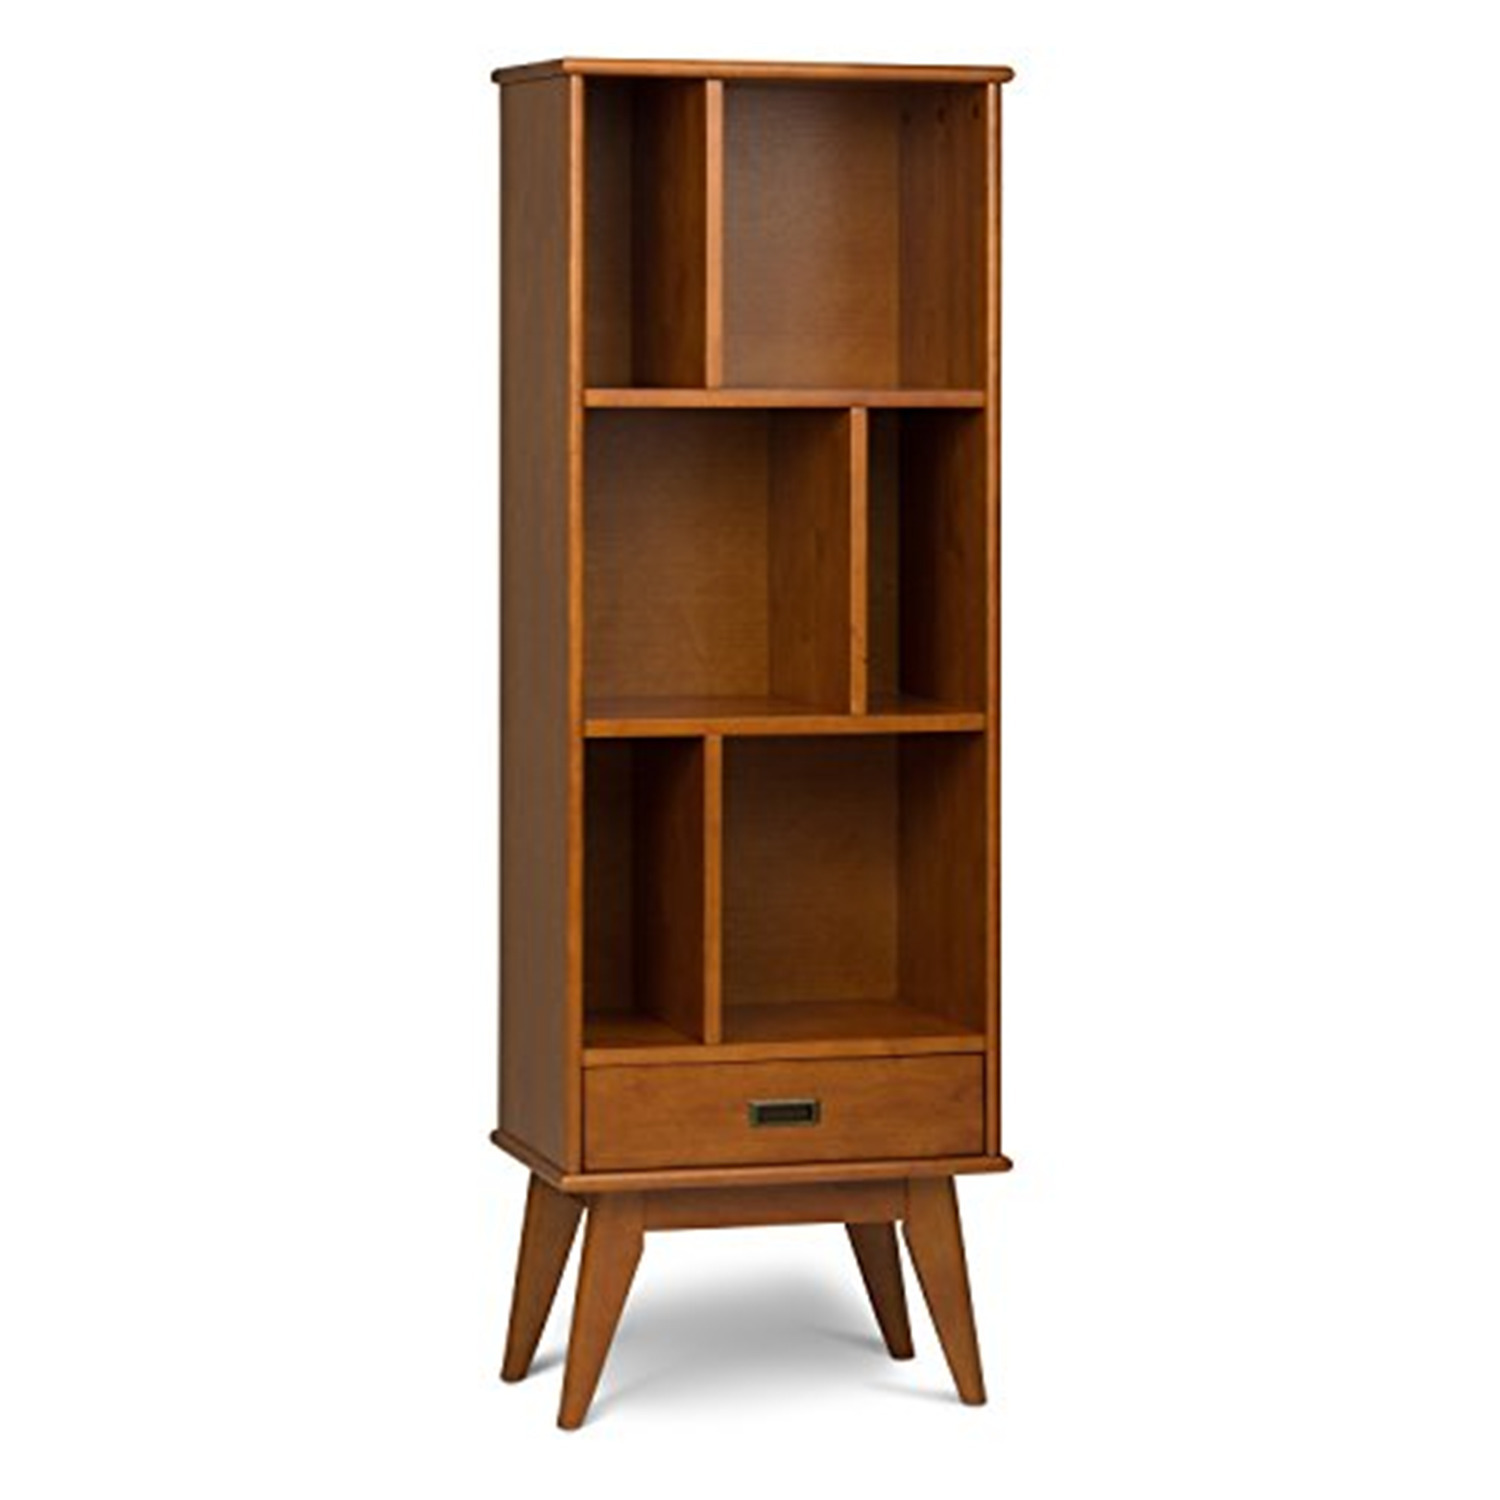 Draper SOLID HARDWOOD 64 inch x 22 inch Mid Century Modern Bookcase and Storage Unit in Teak Brown - image 1 of 3